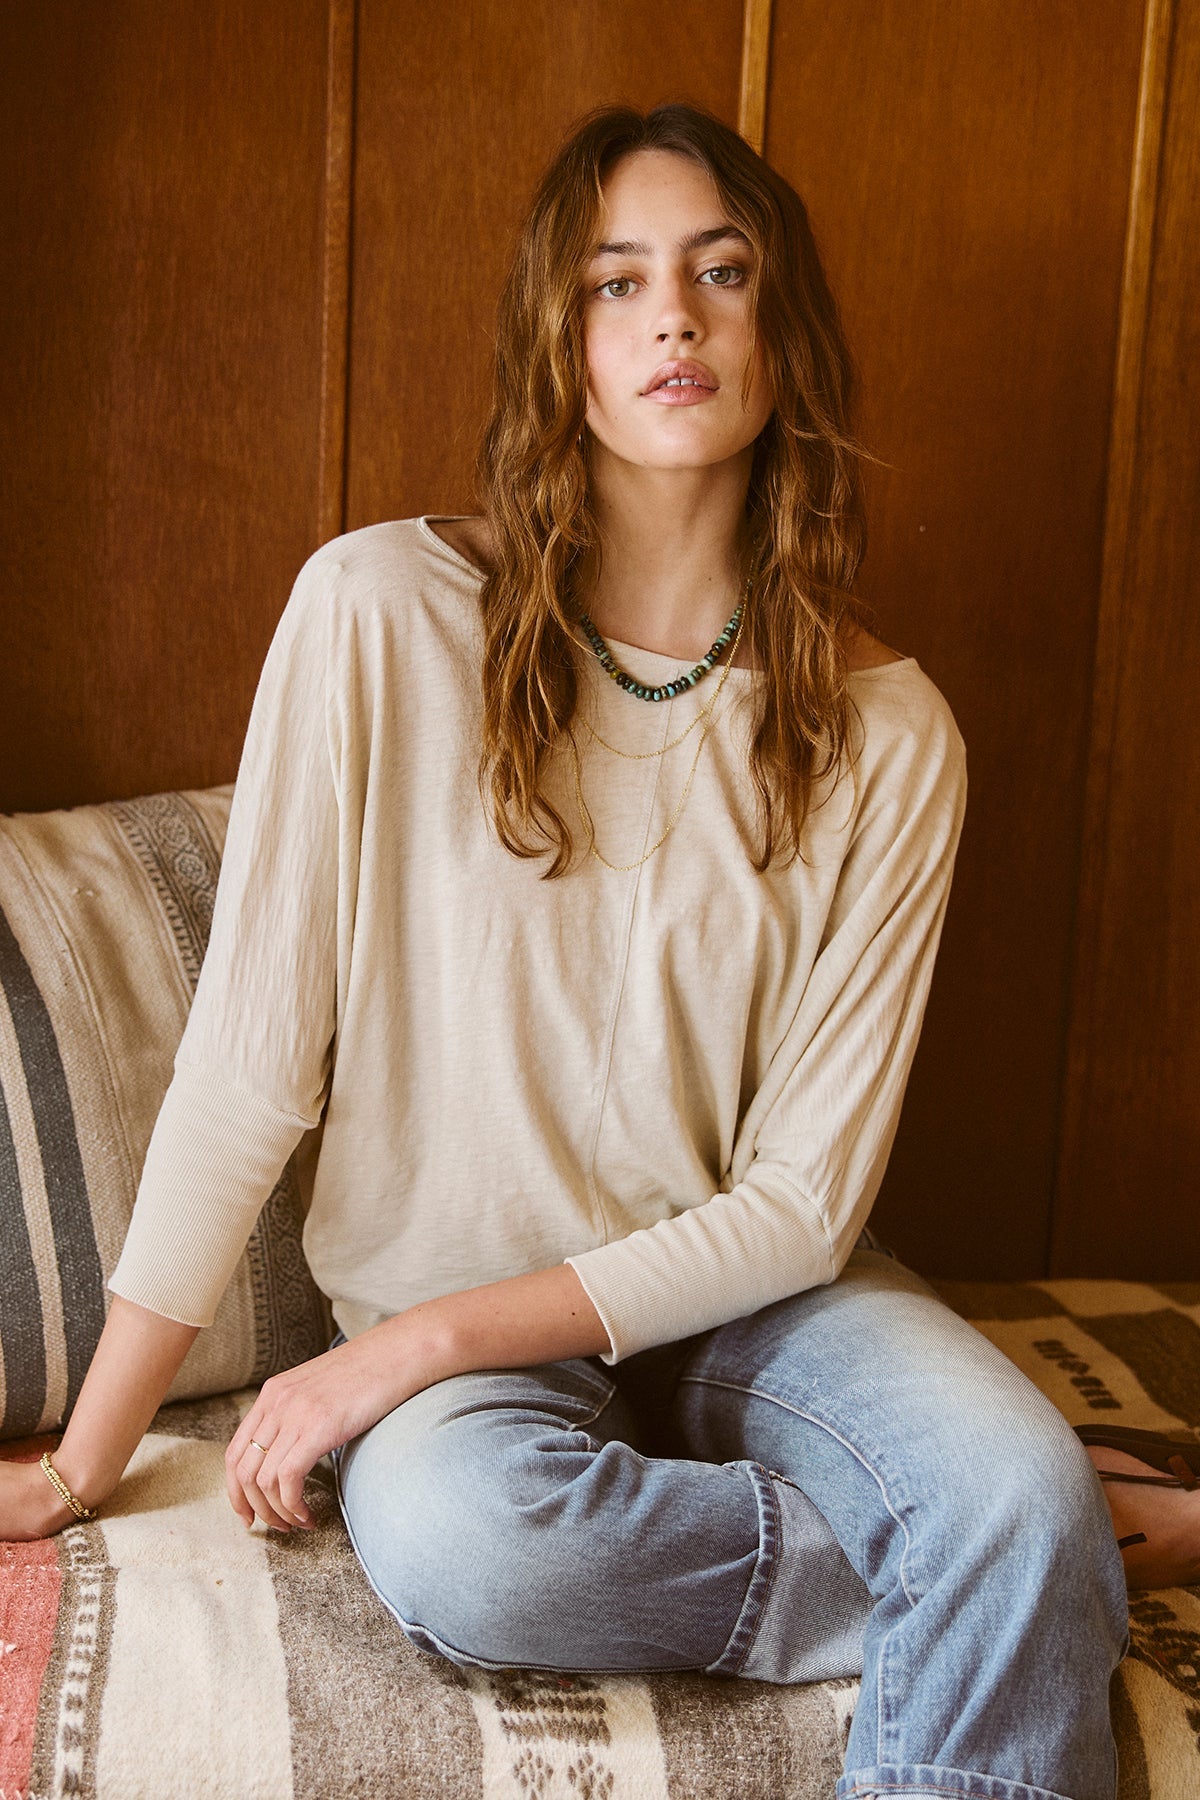   A woman sitting on a couch wearing JOSS DOLMAN SLEEVE TEE by Velvet by Graham & Spencer, jeans, and a beaded necklace 